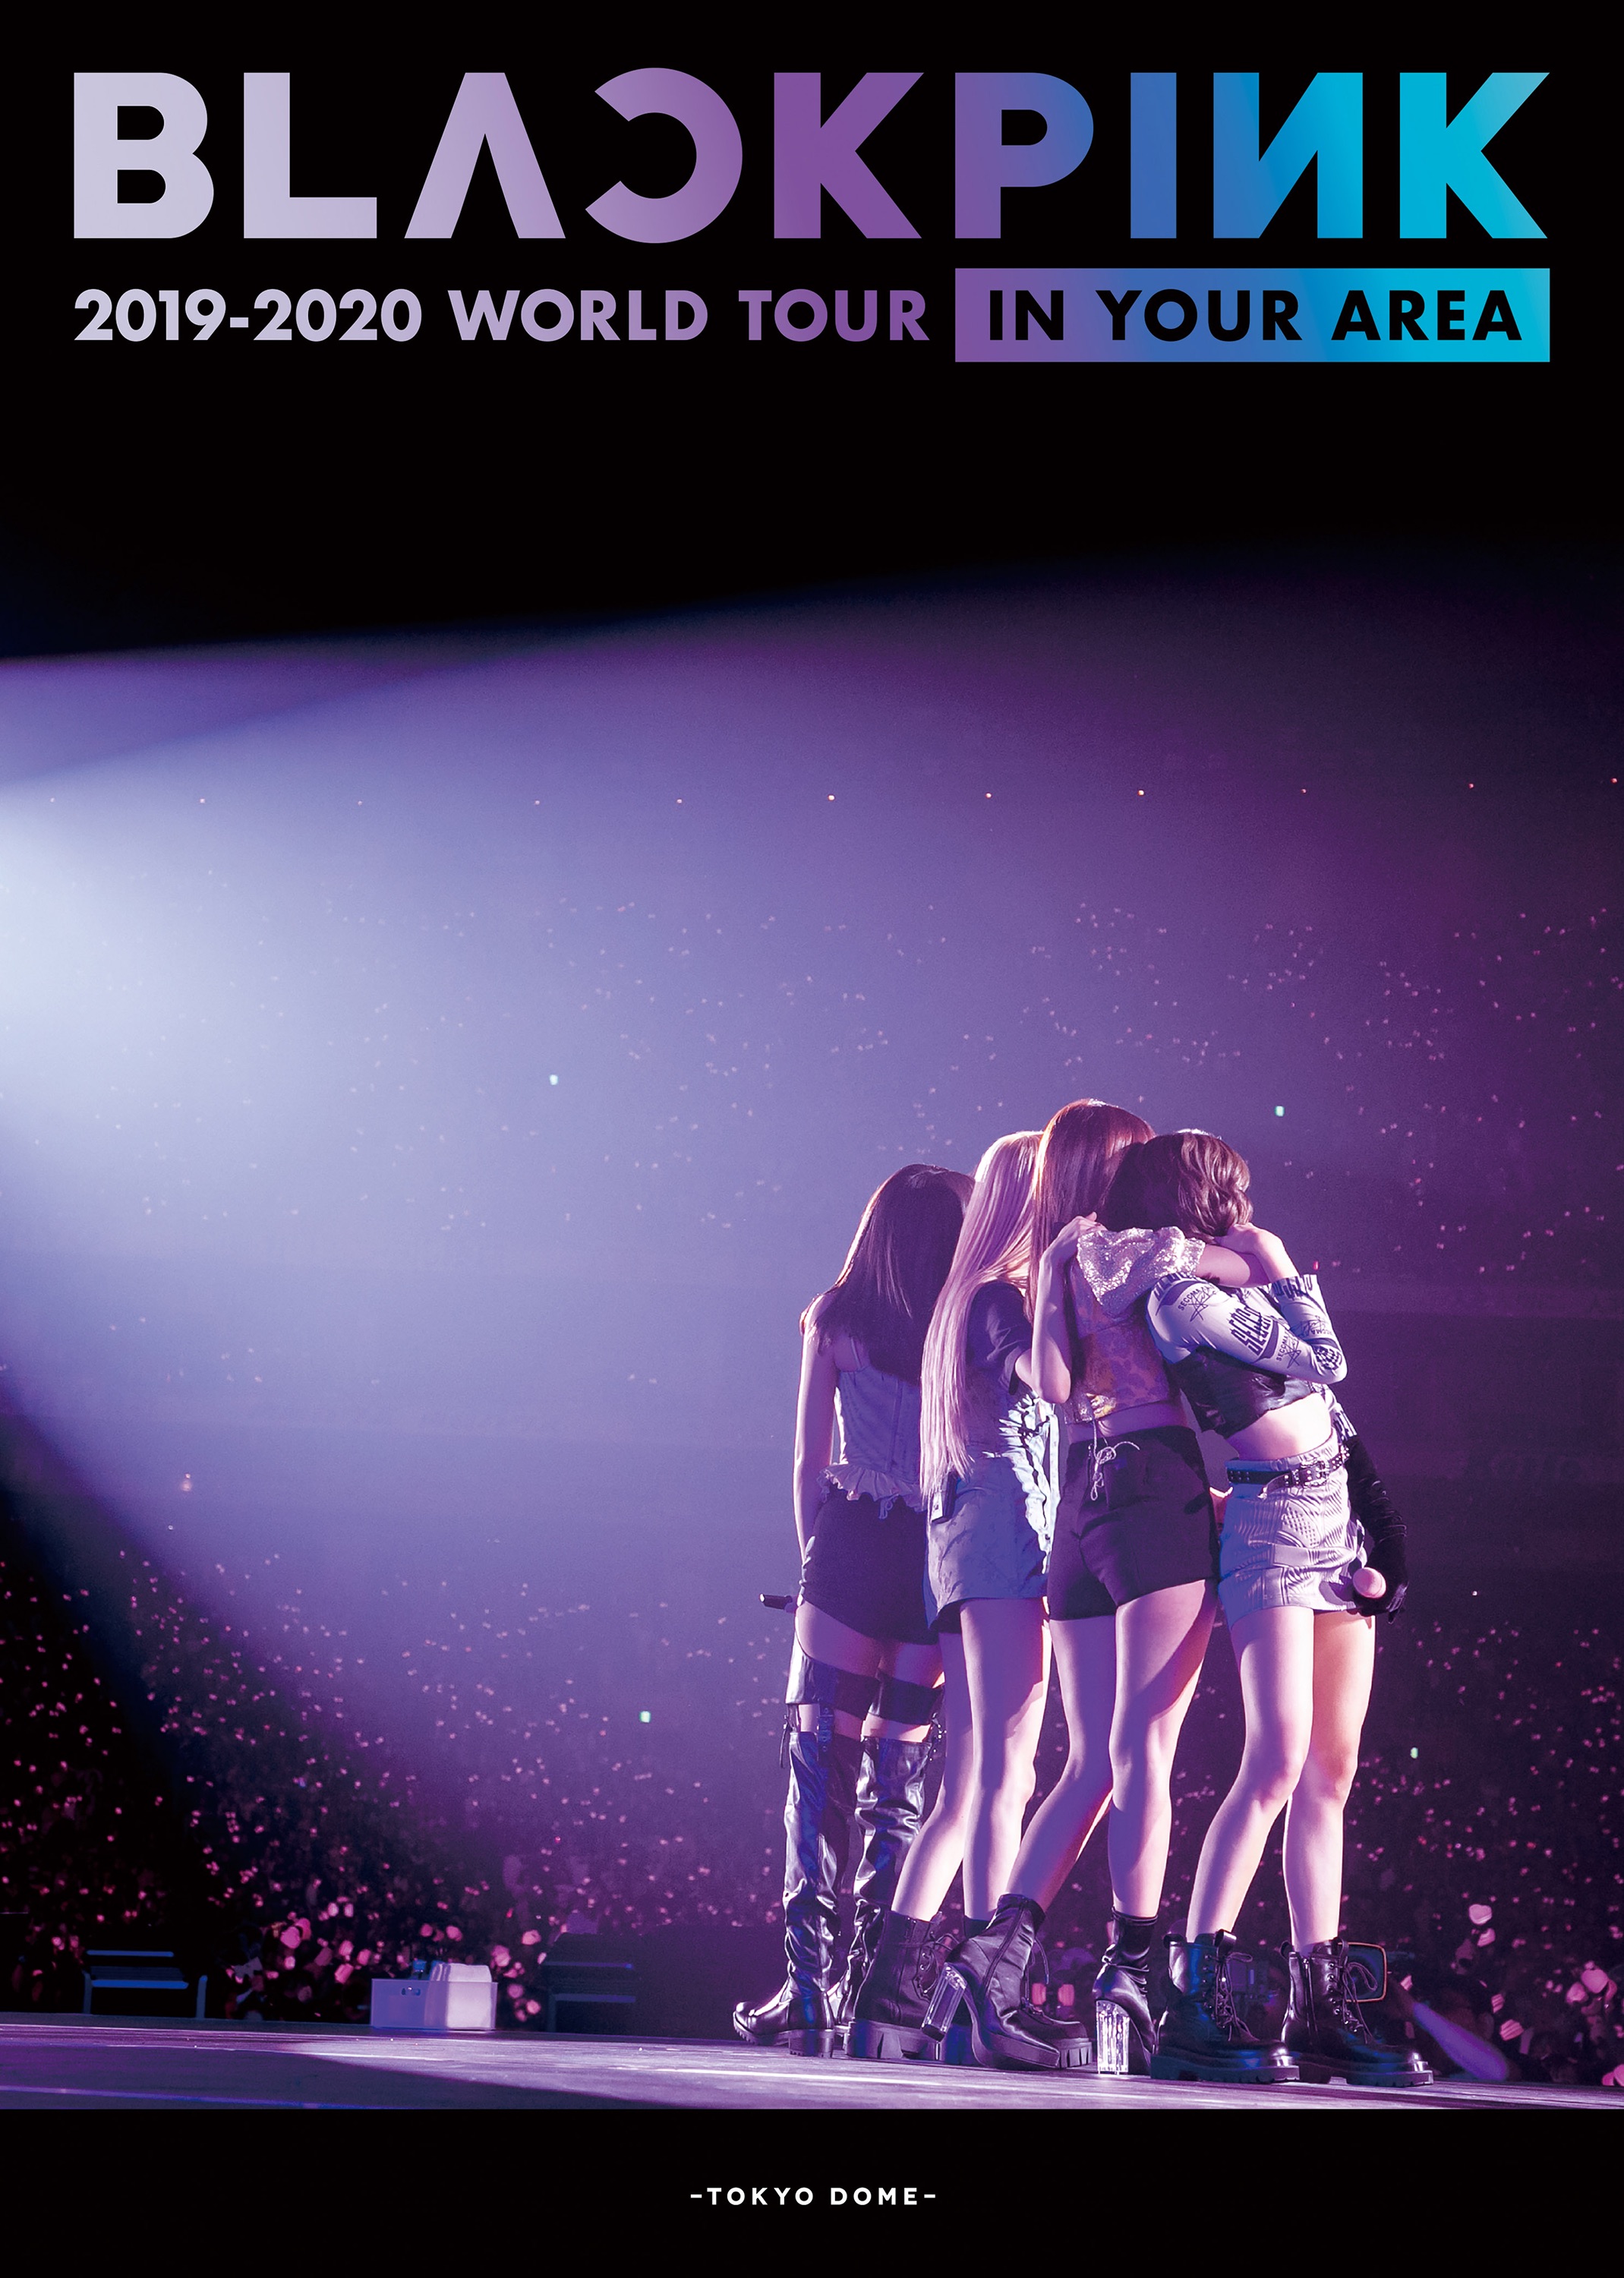 BLACKPINK 2019-2020 World Tour In Your Area - Tokyo Dome | BLACK